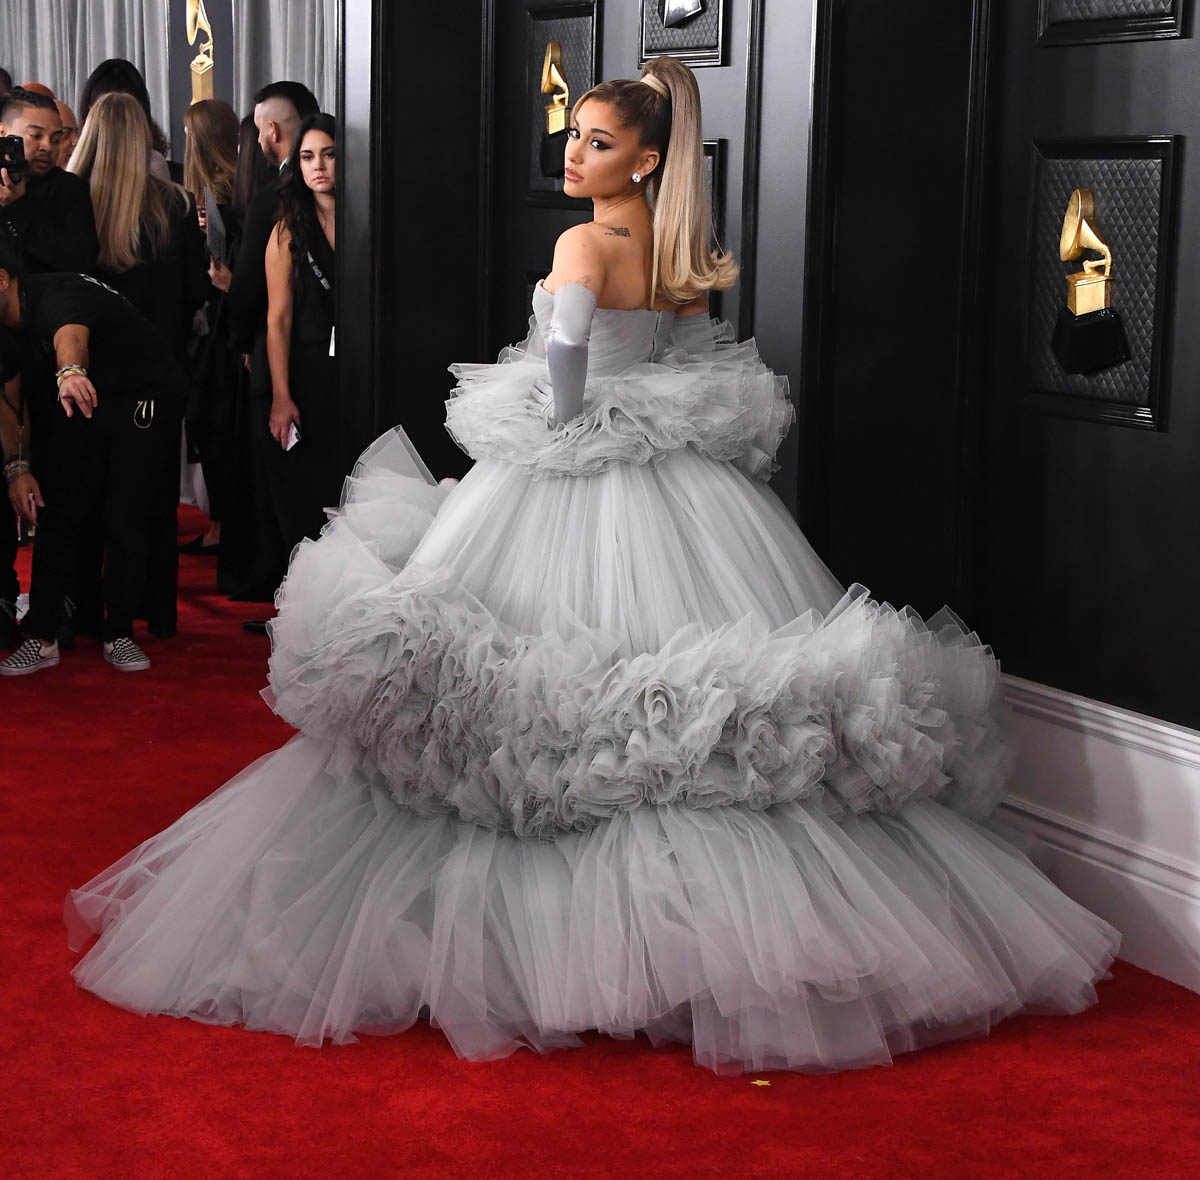 Lizzo and Ariana Grande stood out at the Grammys in over-the-top looks